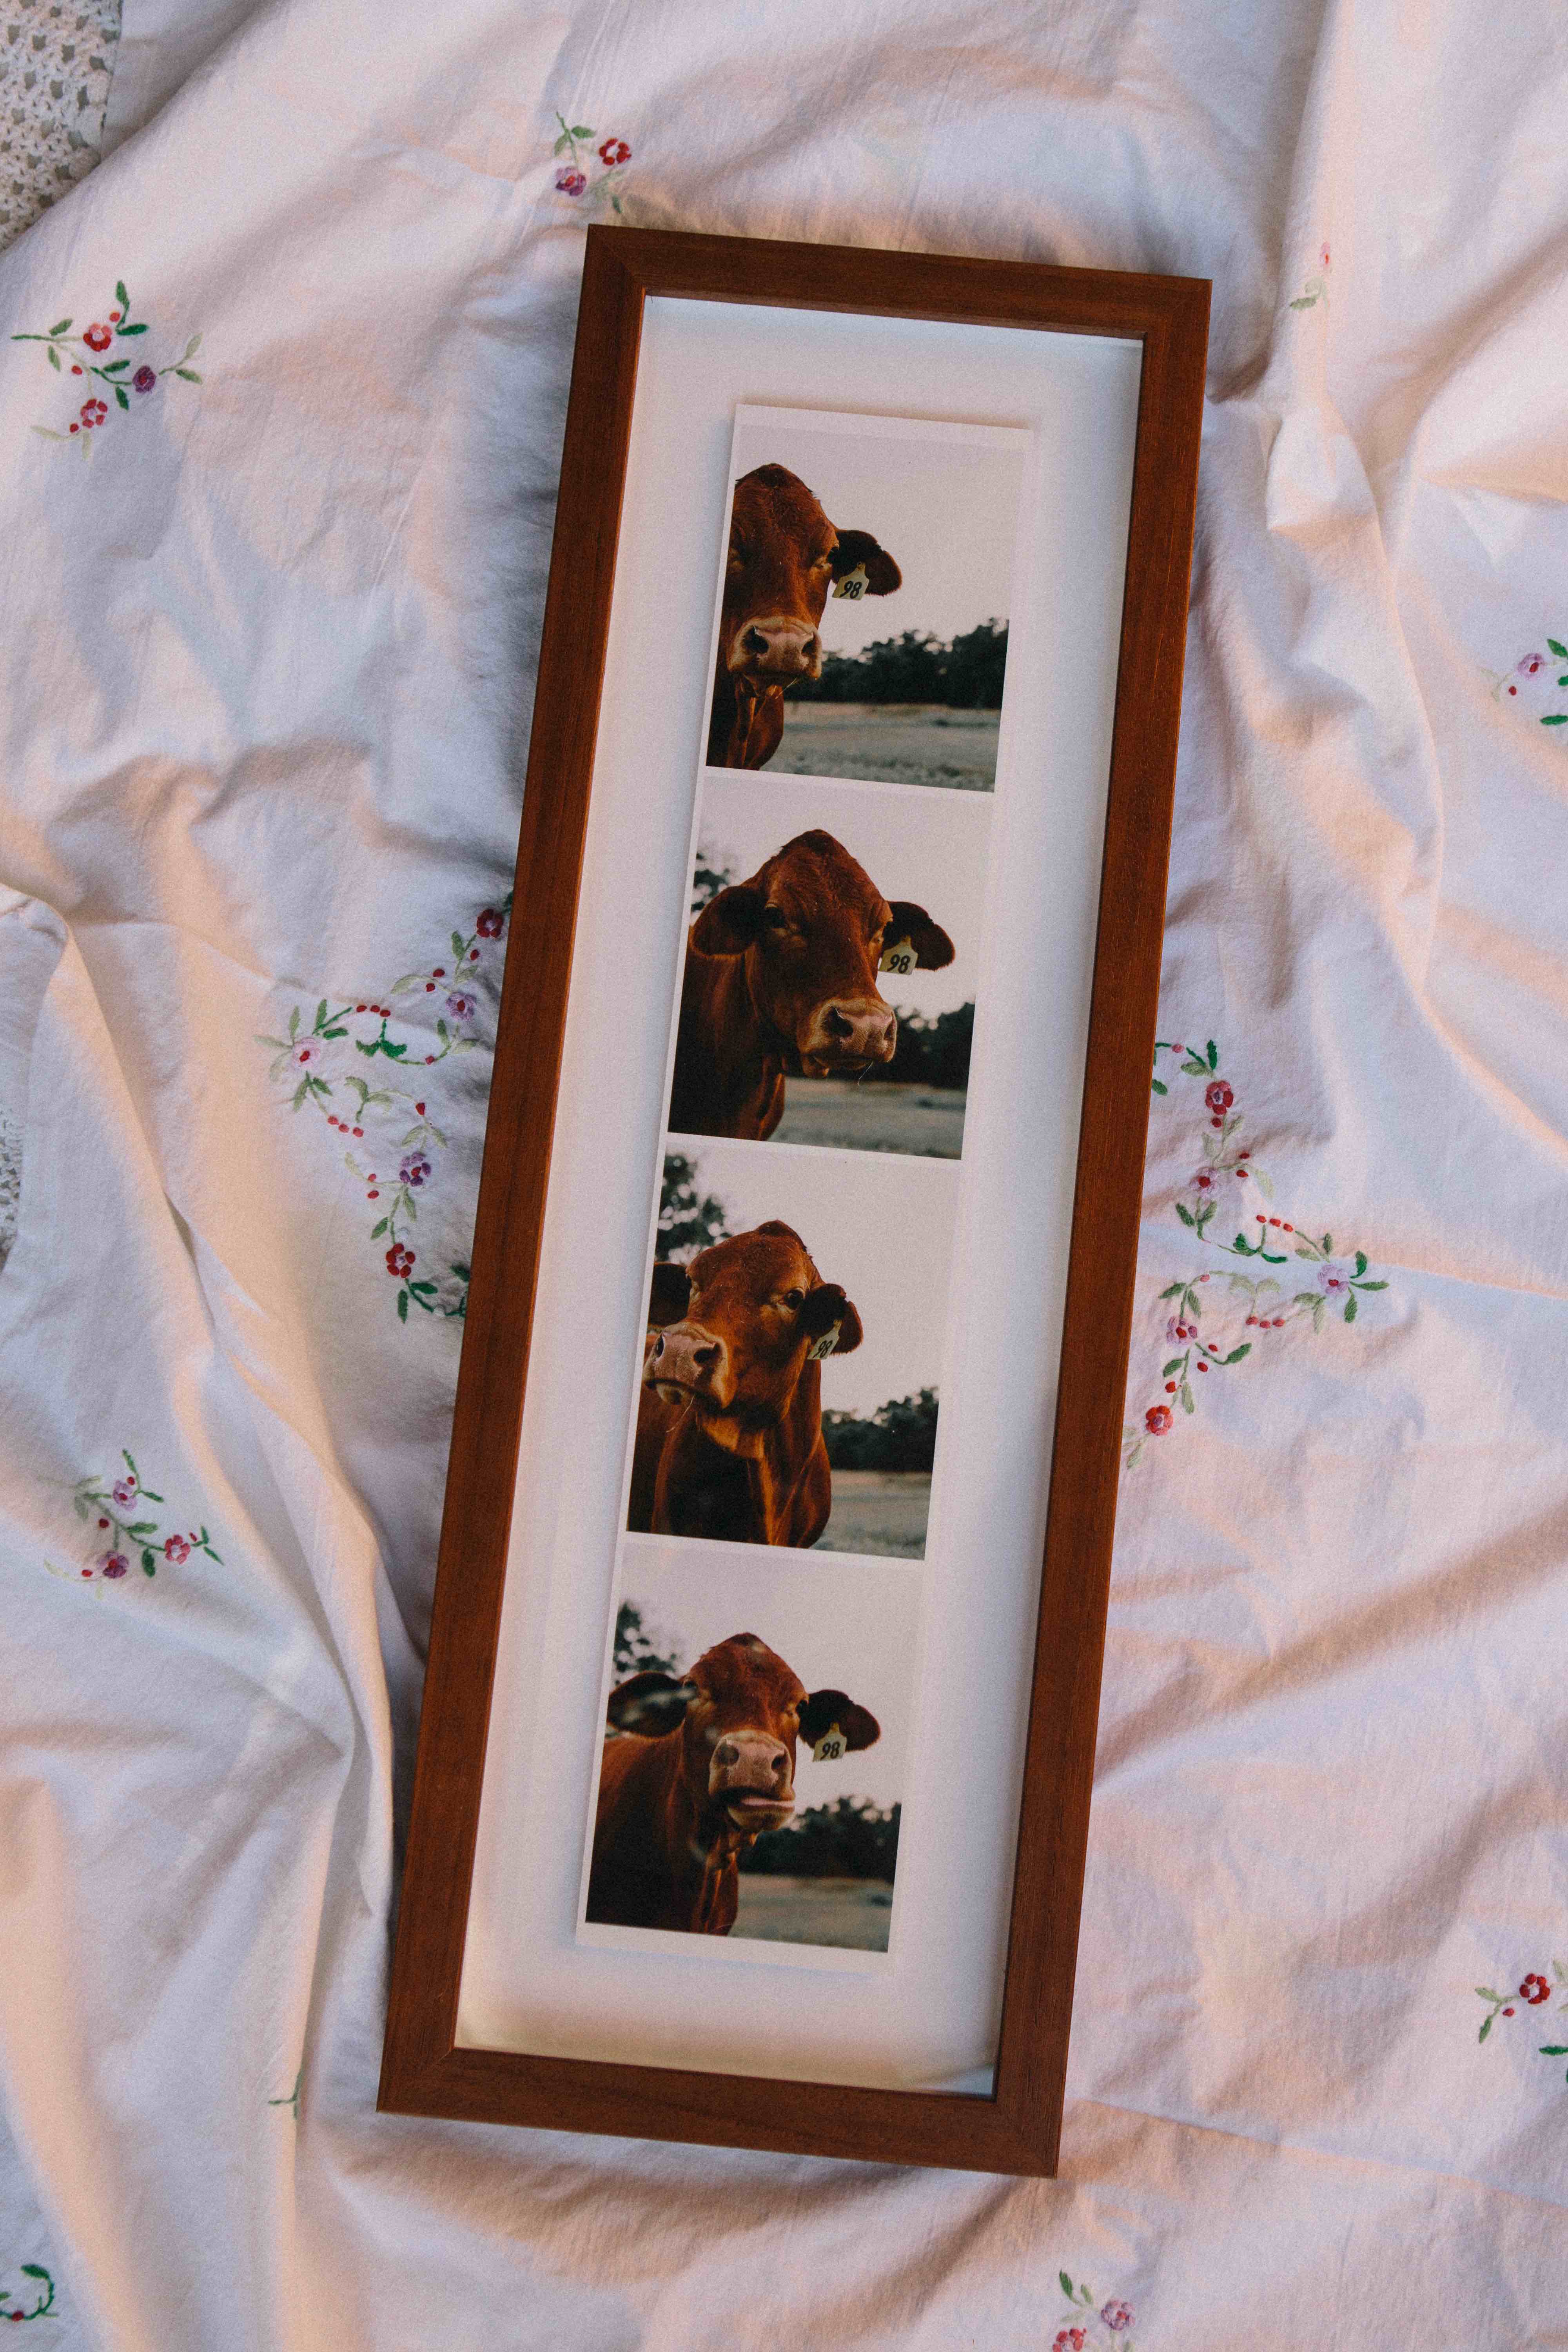 four photos of a pair of cows in a dark wood frame on a floral bed sheet